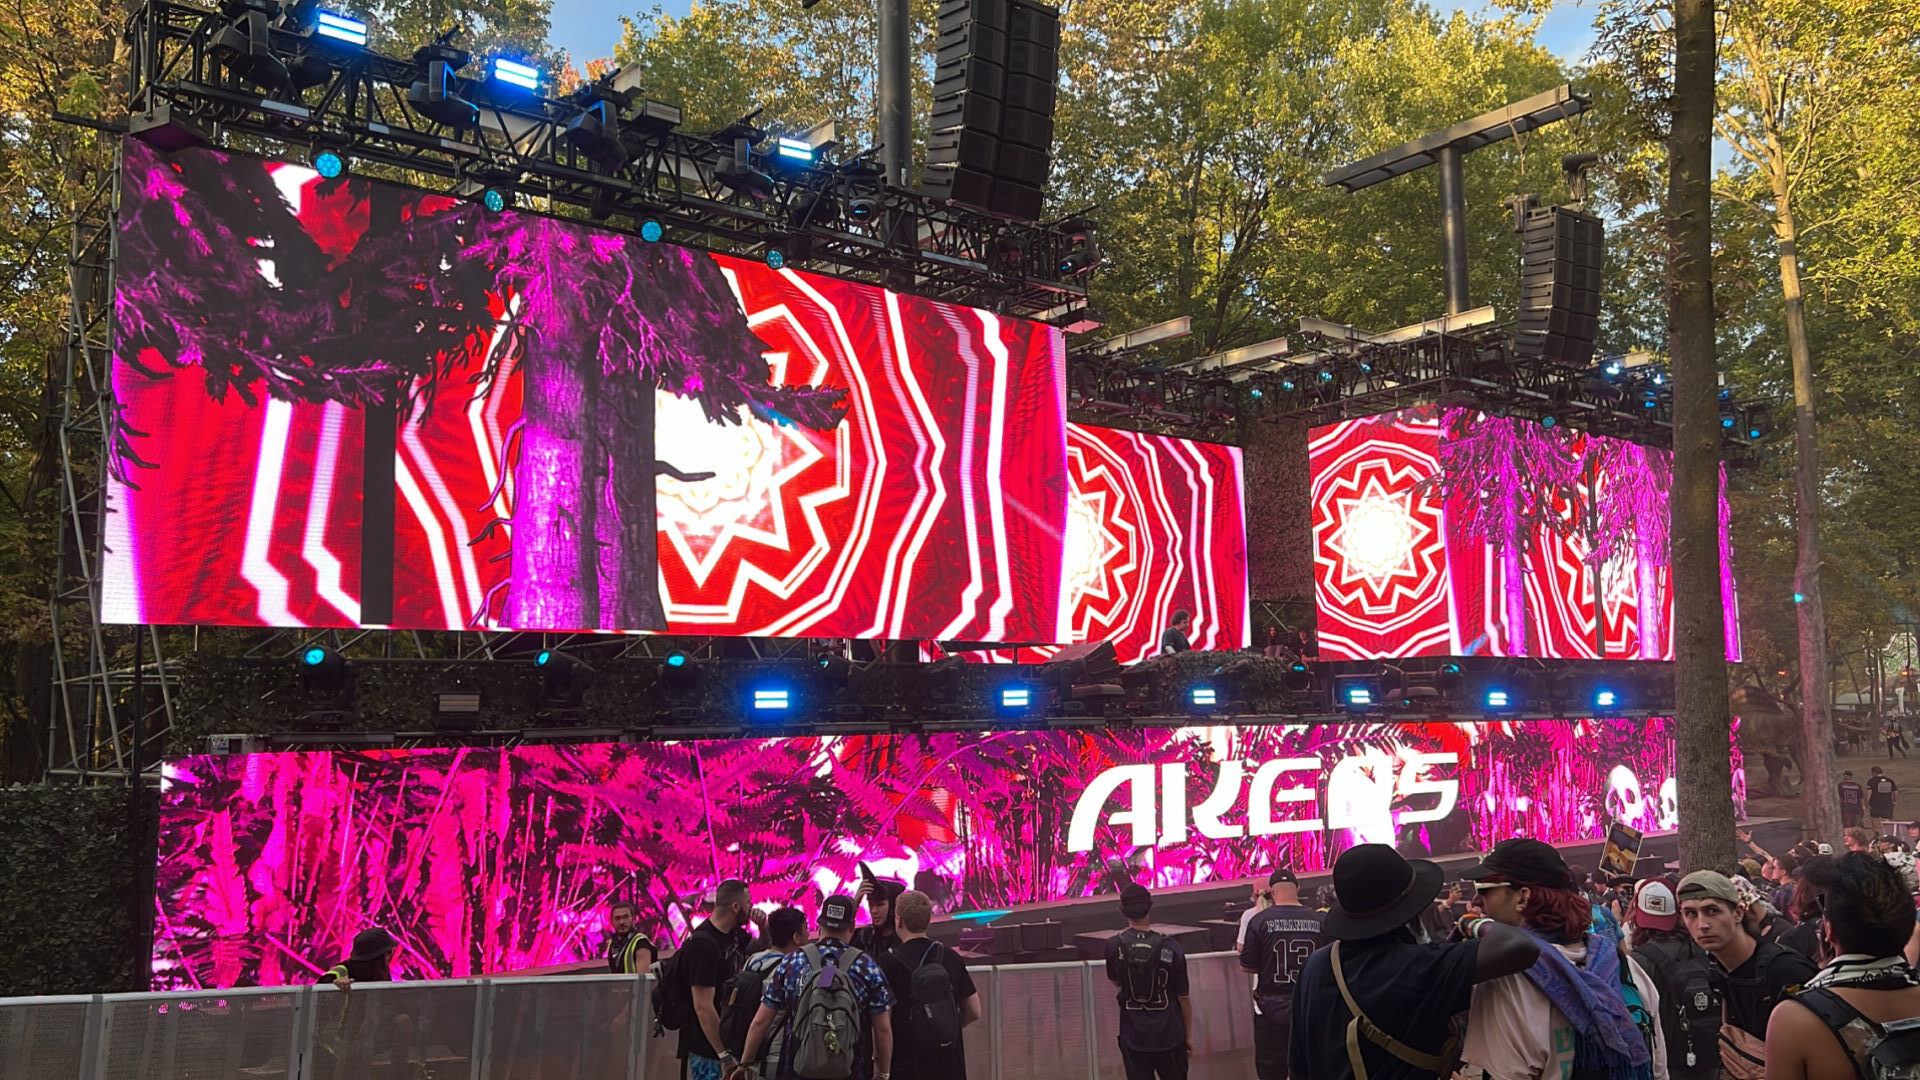 Akeos Perfoming at the Subsidia Stage with kaleidoscope visuals